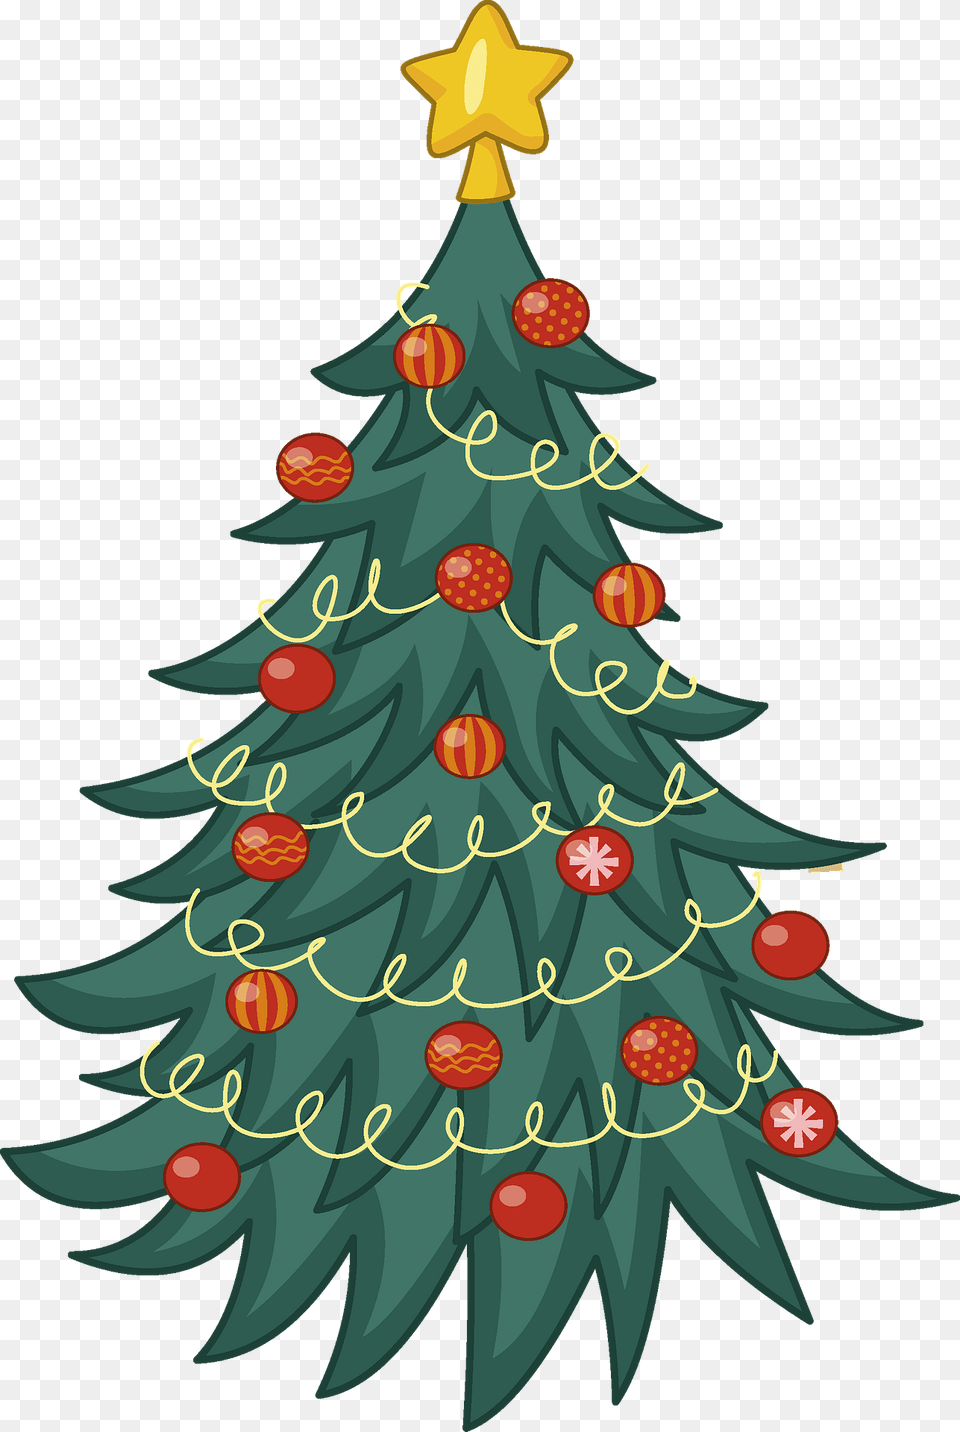 Christmas Tree Clipart, Christmas Decorations, Festival, Christmas Tree Free Transparent Png